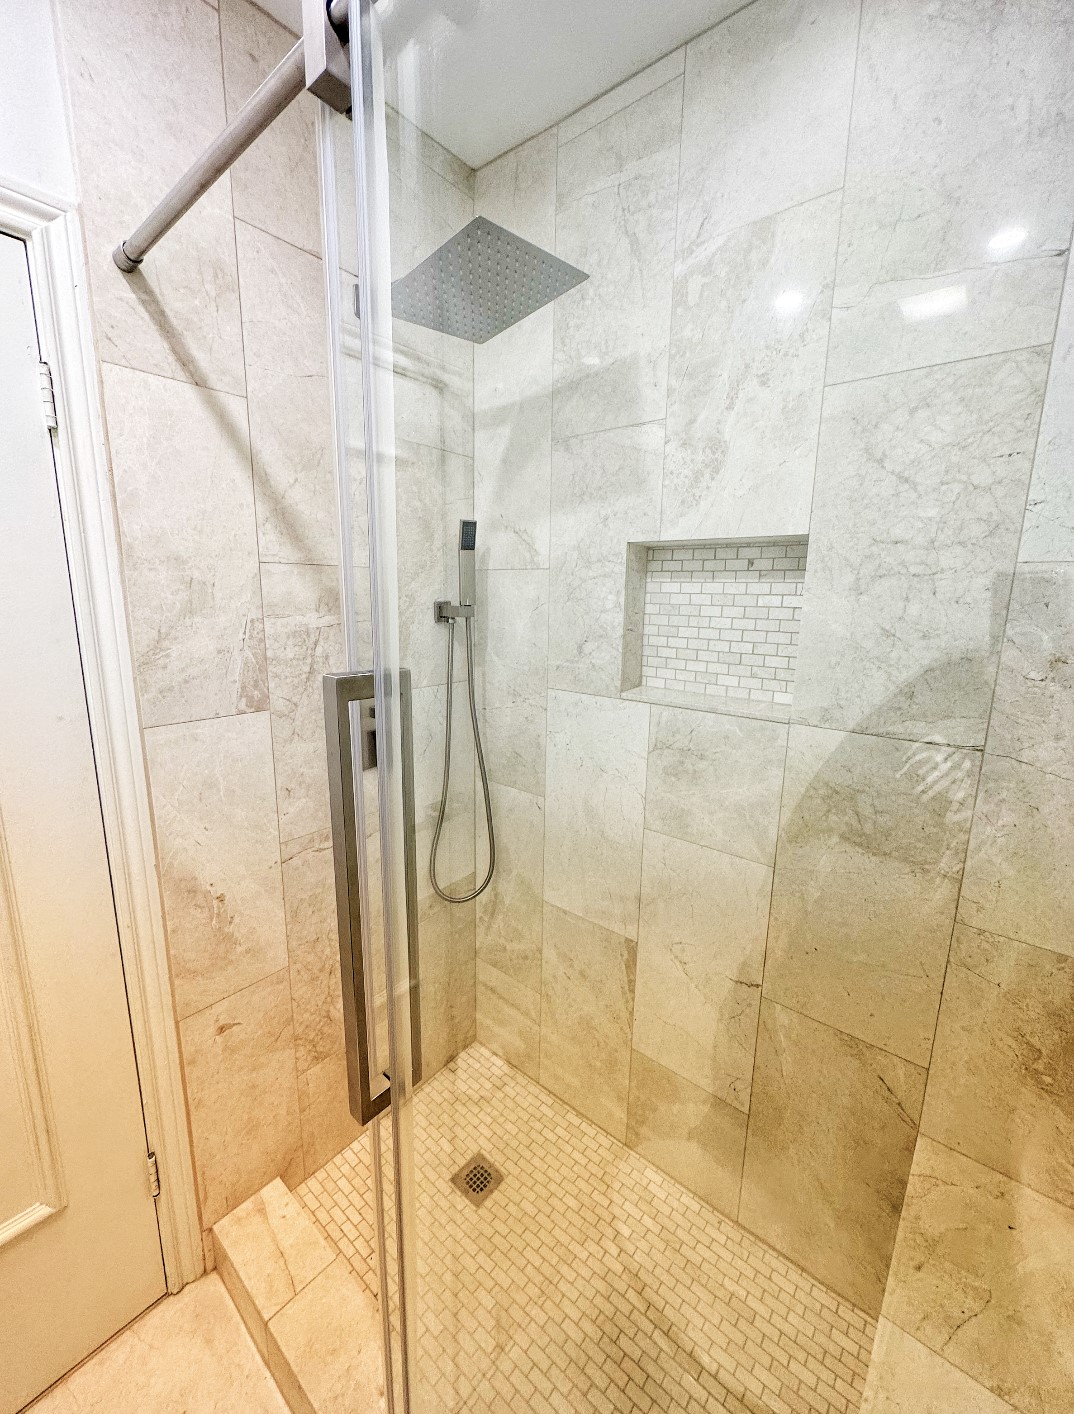 Down stairs shower